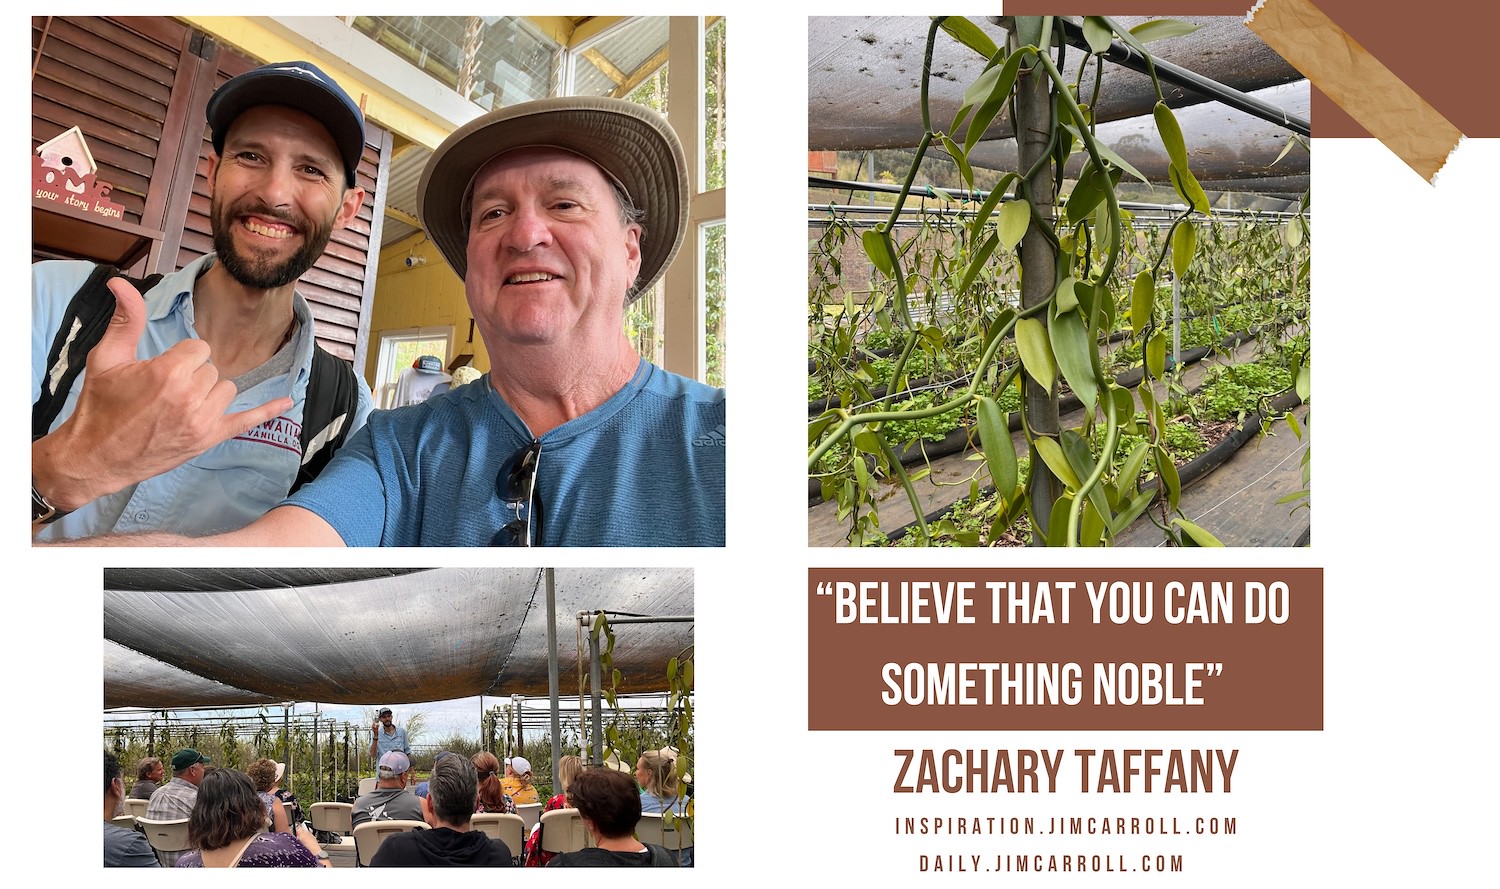 "Believe that you can do something noble" - Zachary Taffany